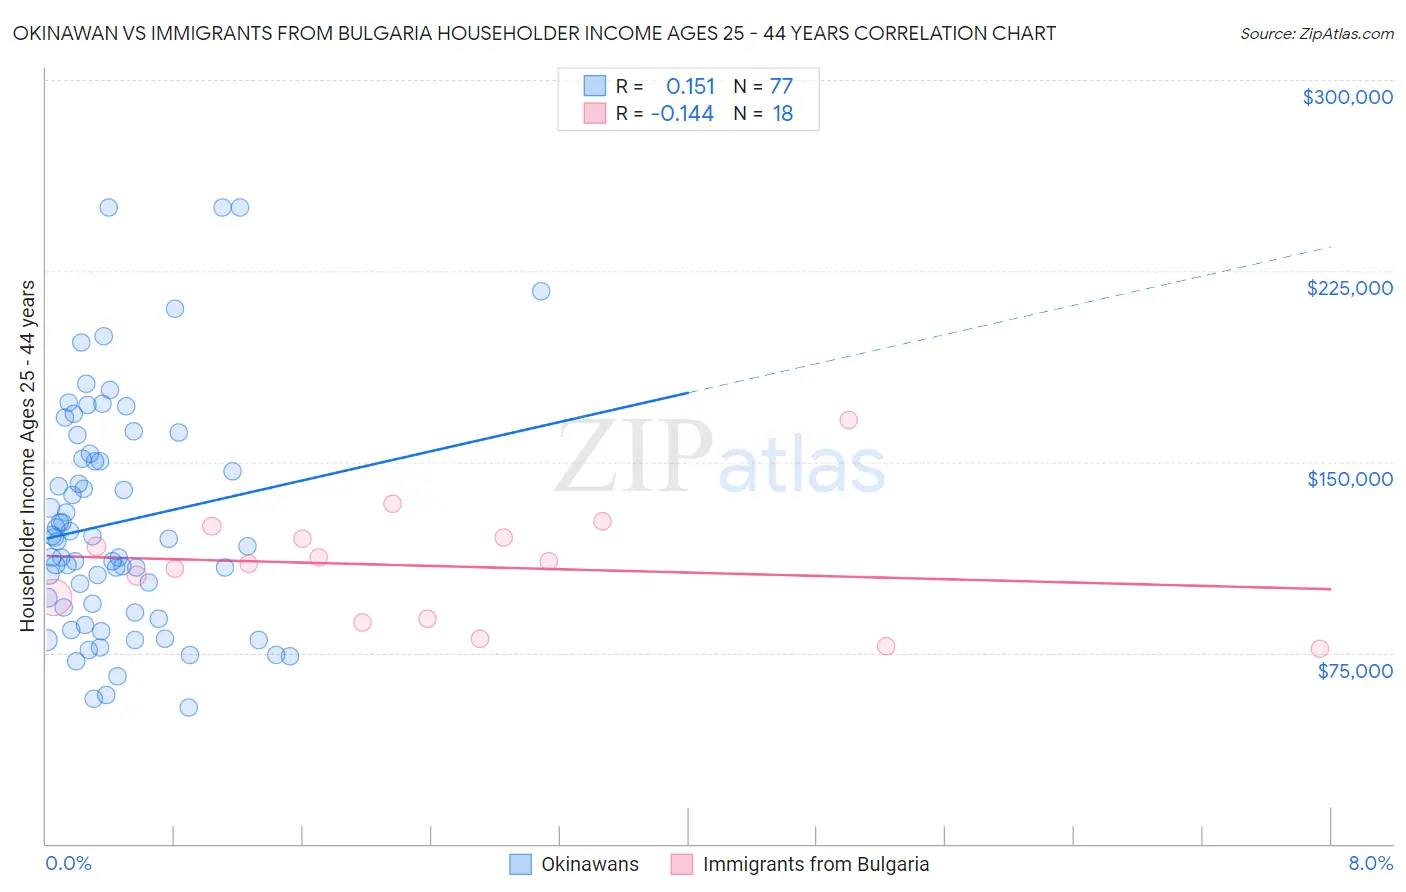 Okinawan vs Immigrants from Bulgaria Householder Income Ages 25 - 44 years